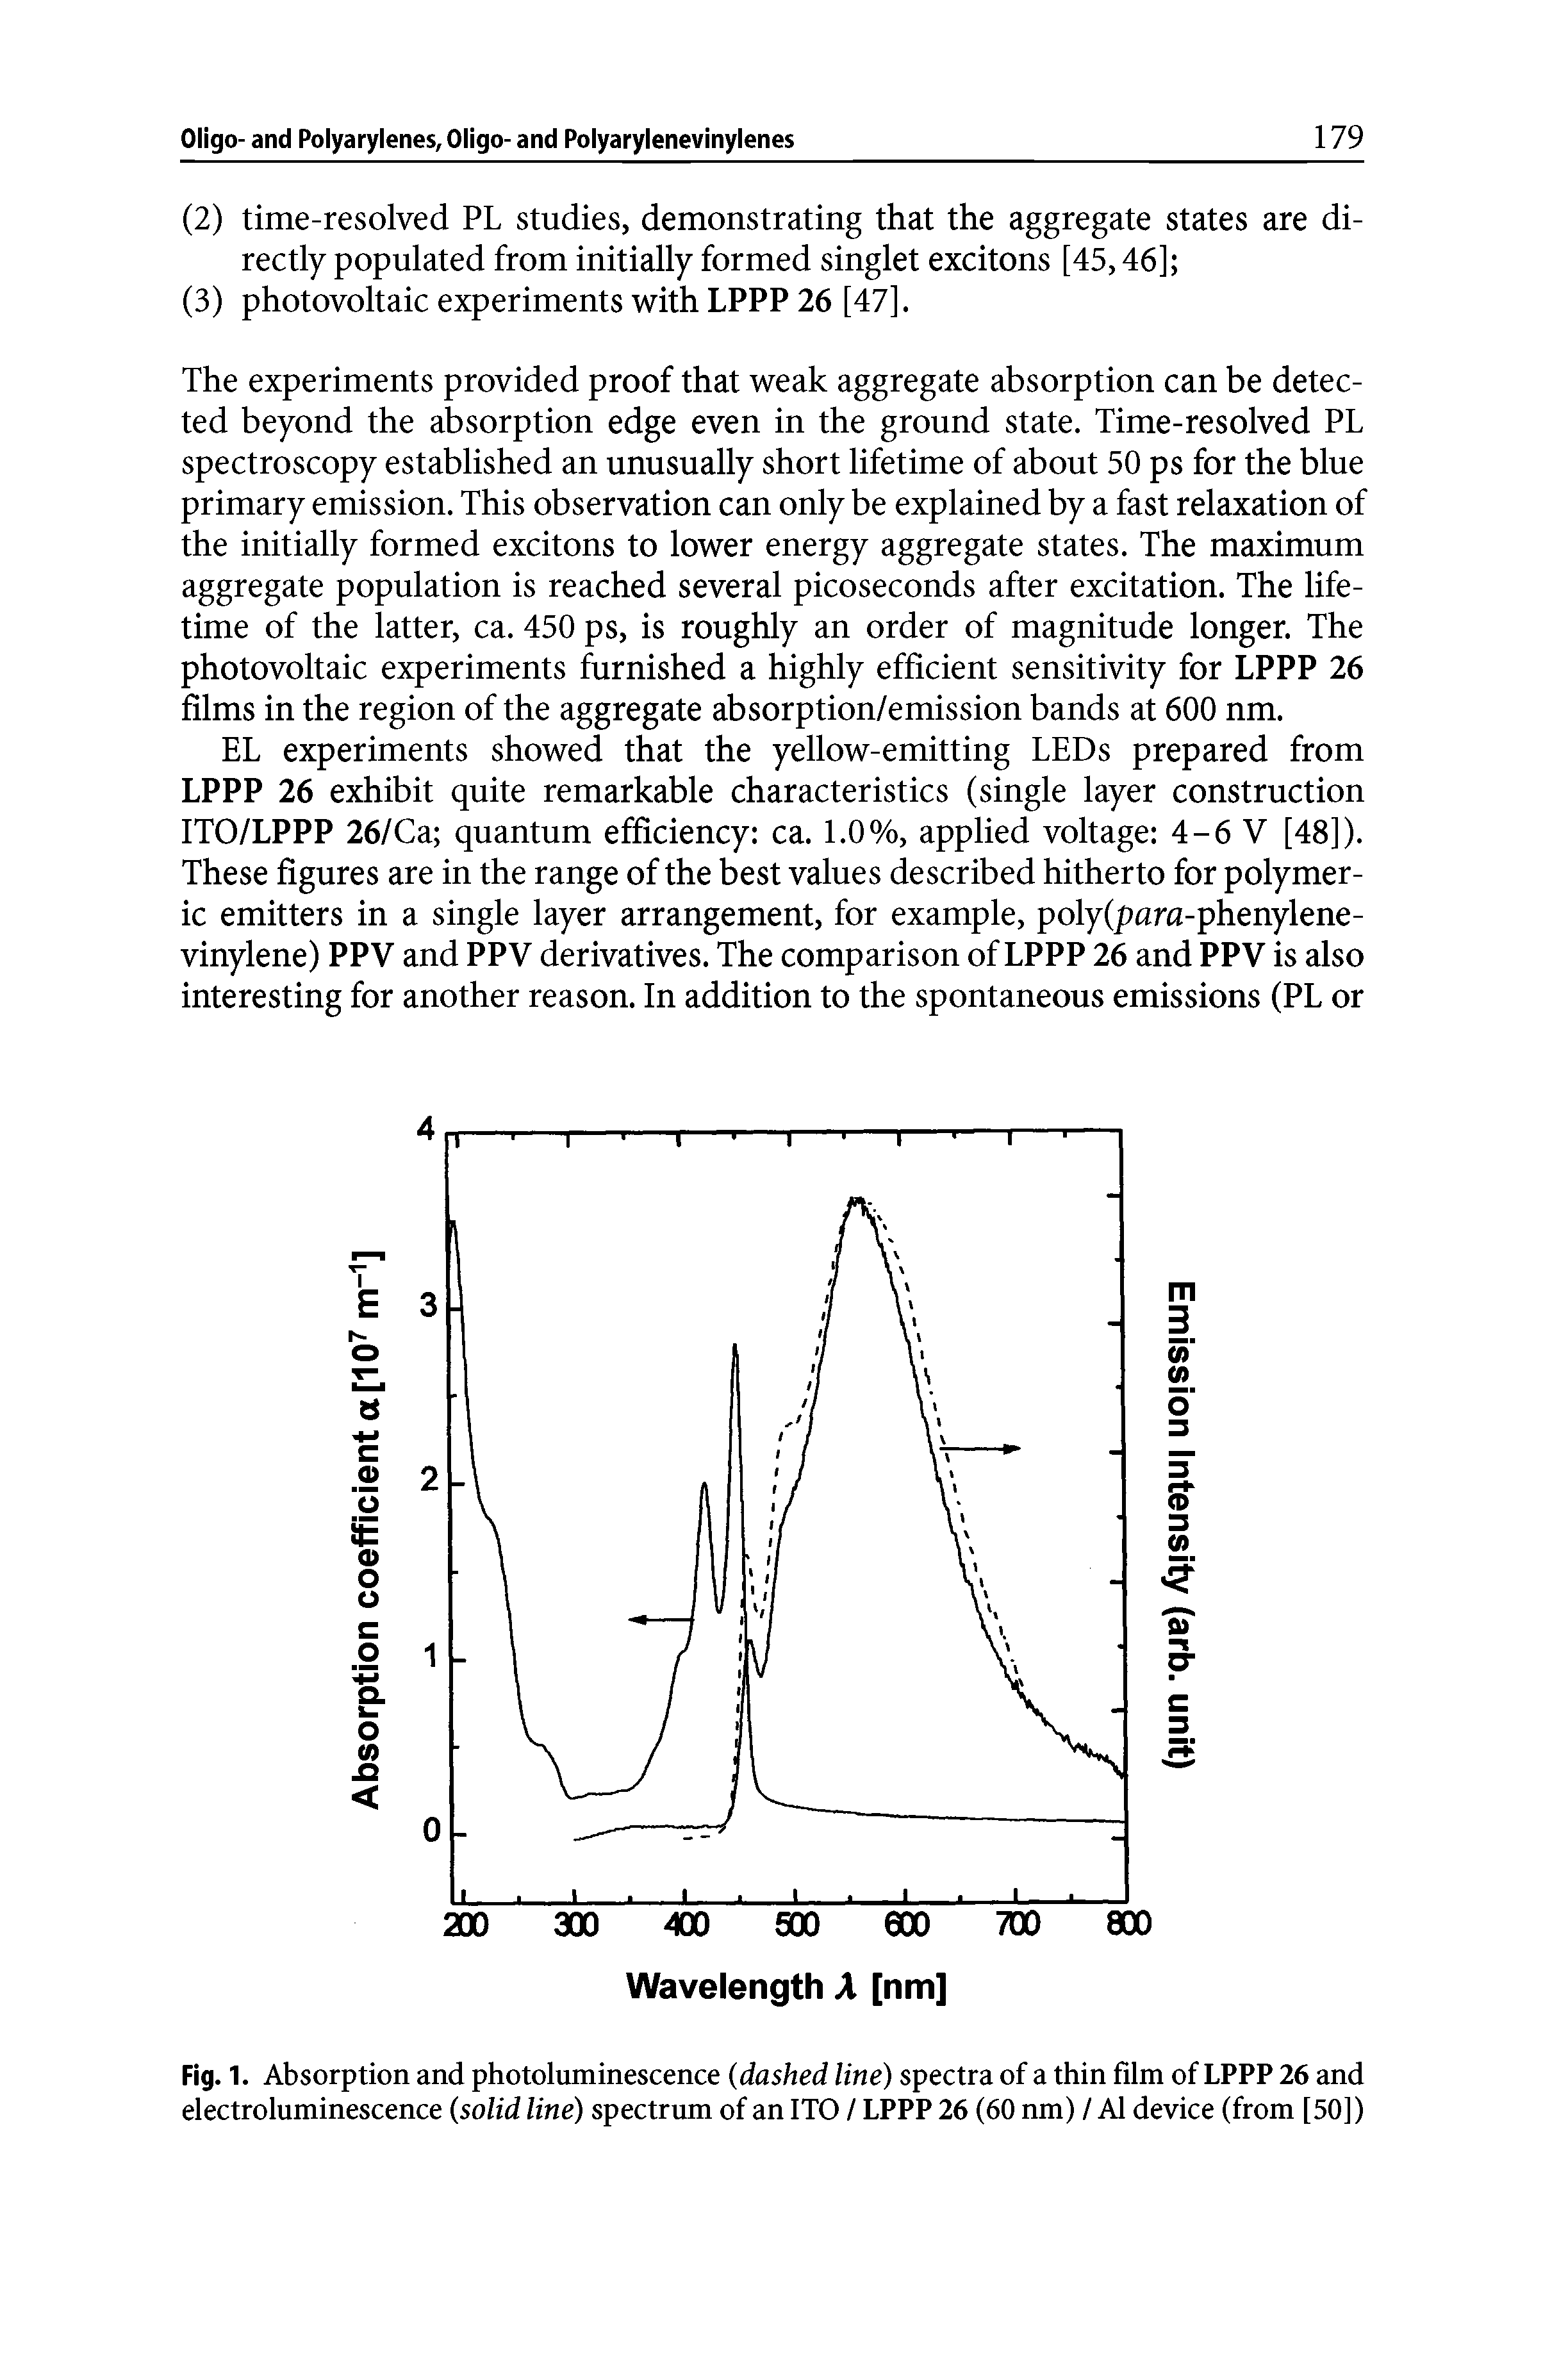 Fig. 1. Absorption and photoluminescence dashed line) spectra of a thin film of LPPP 26 and electroluminescence solid line) spectrum of an ITO / LPPP 26 (60 nm) / A1 device (from [50])...